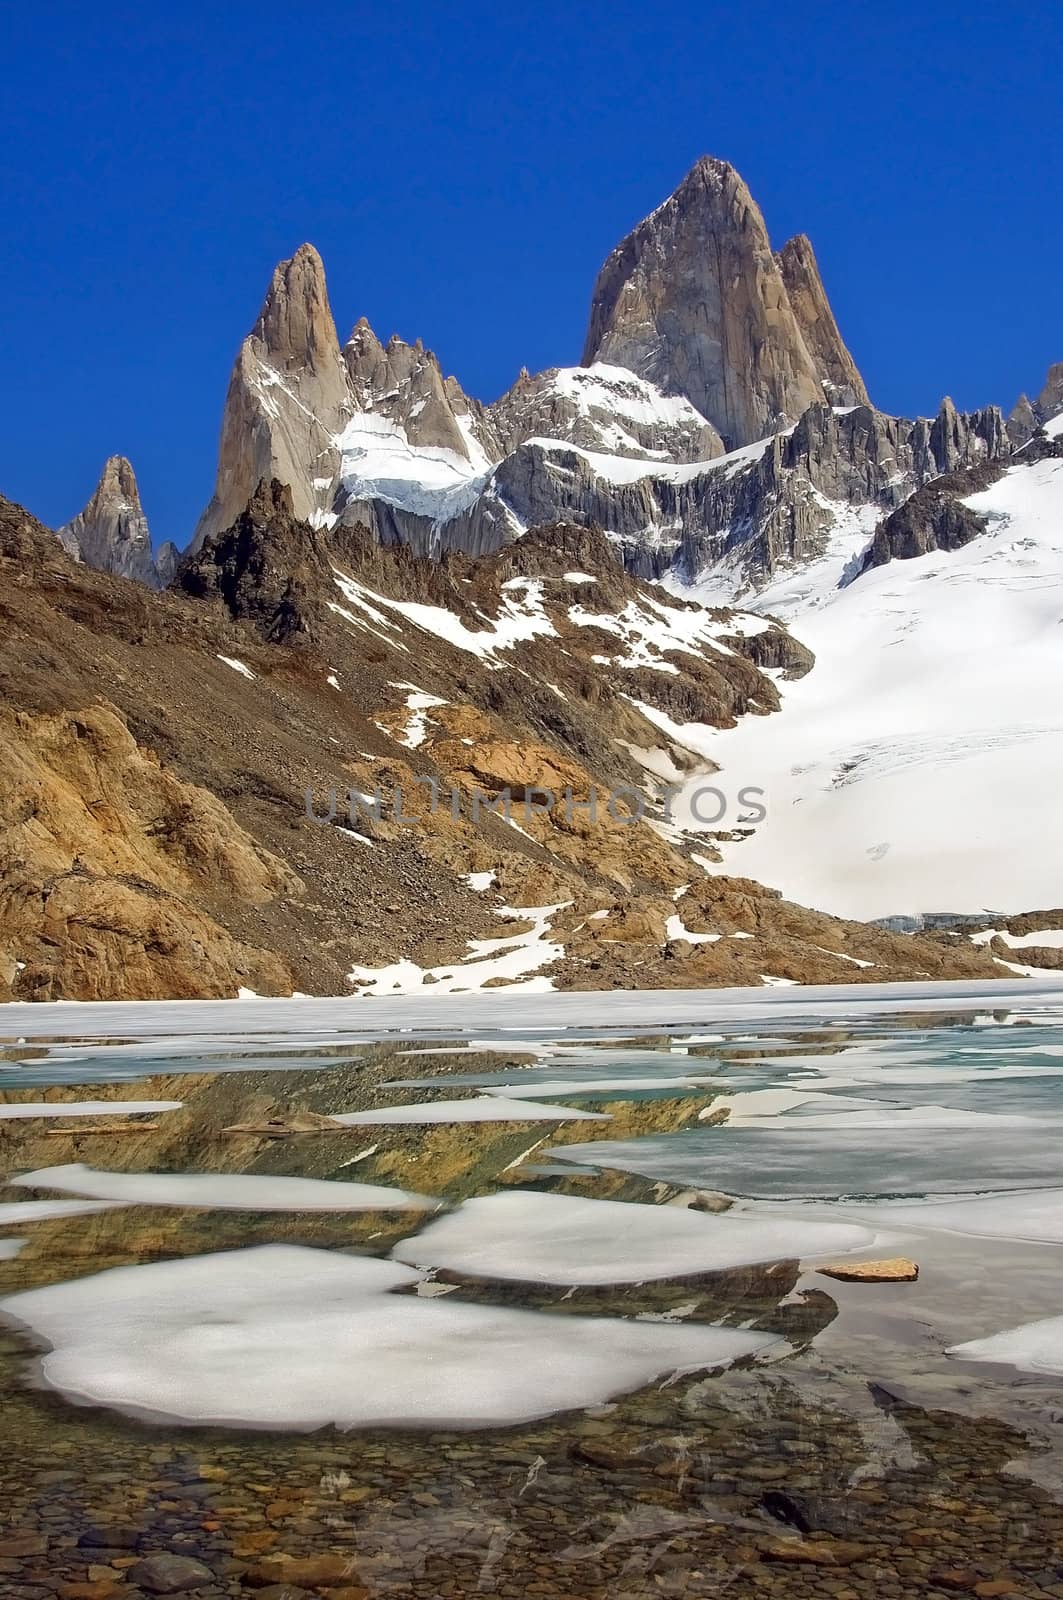 snow on top of Fitz Roy, Patagonia Argentina